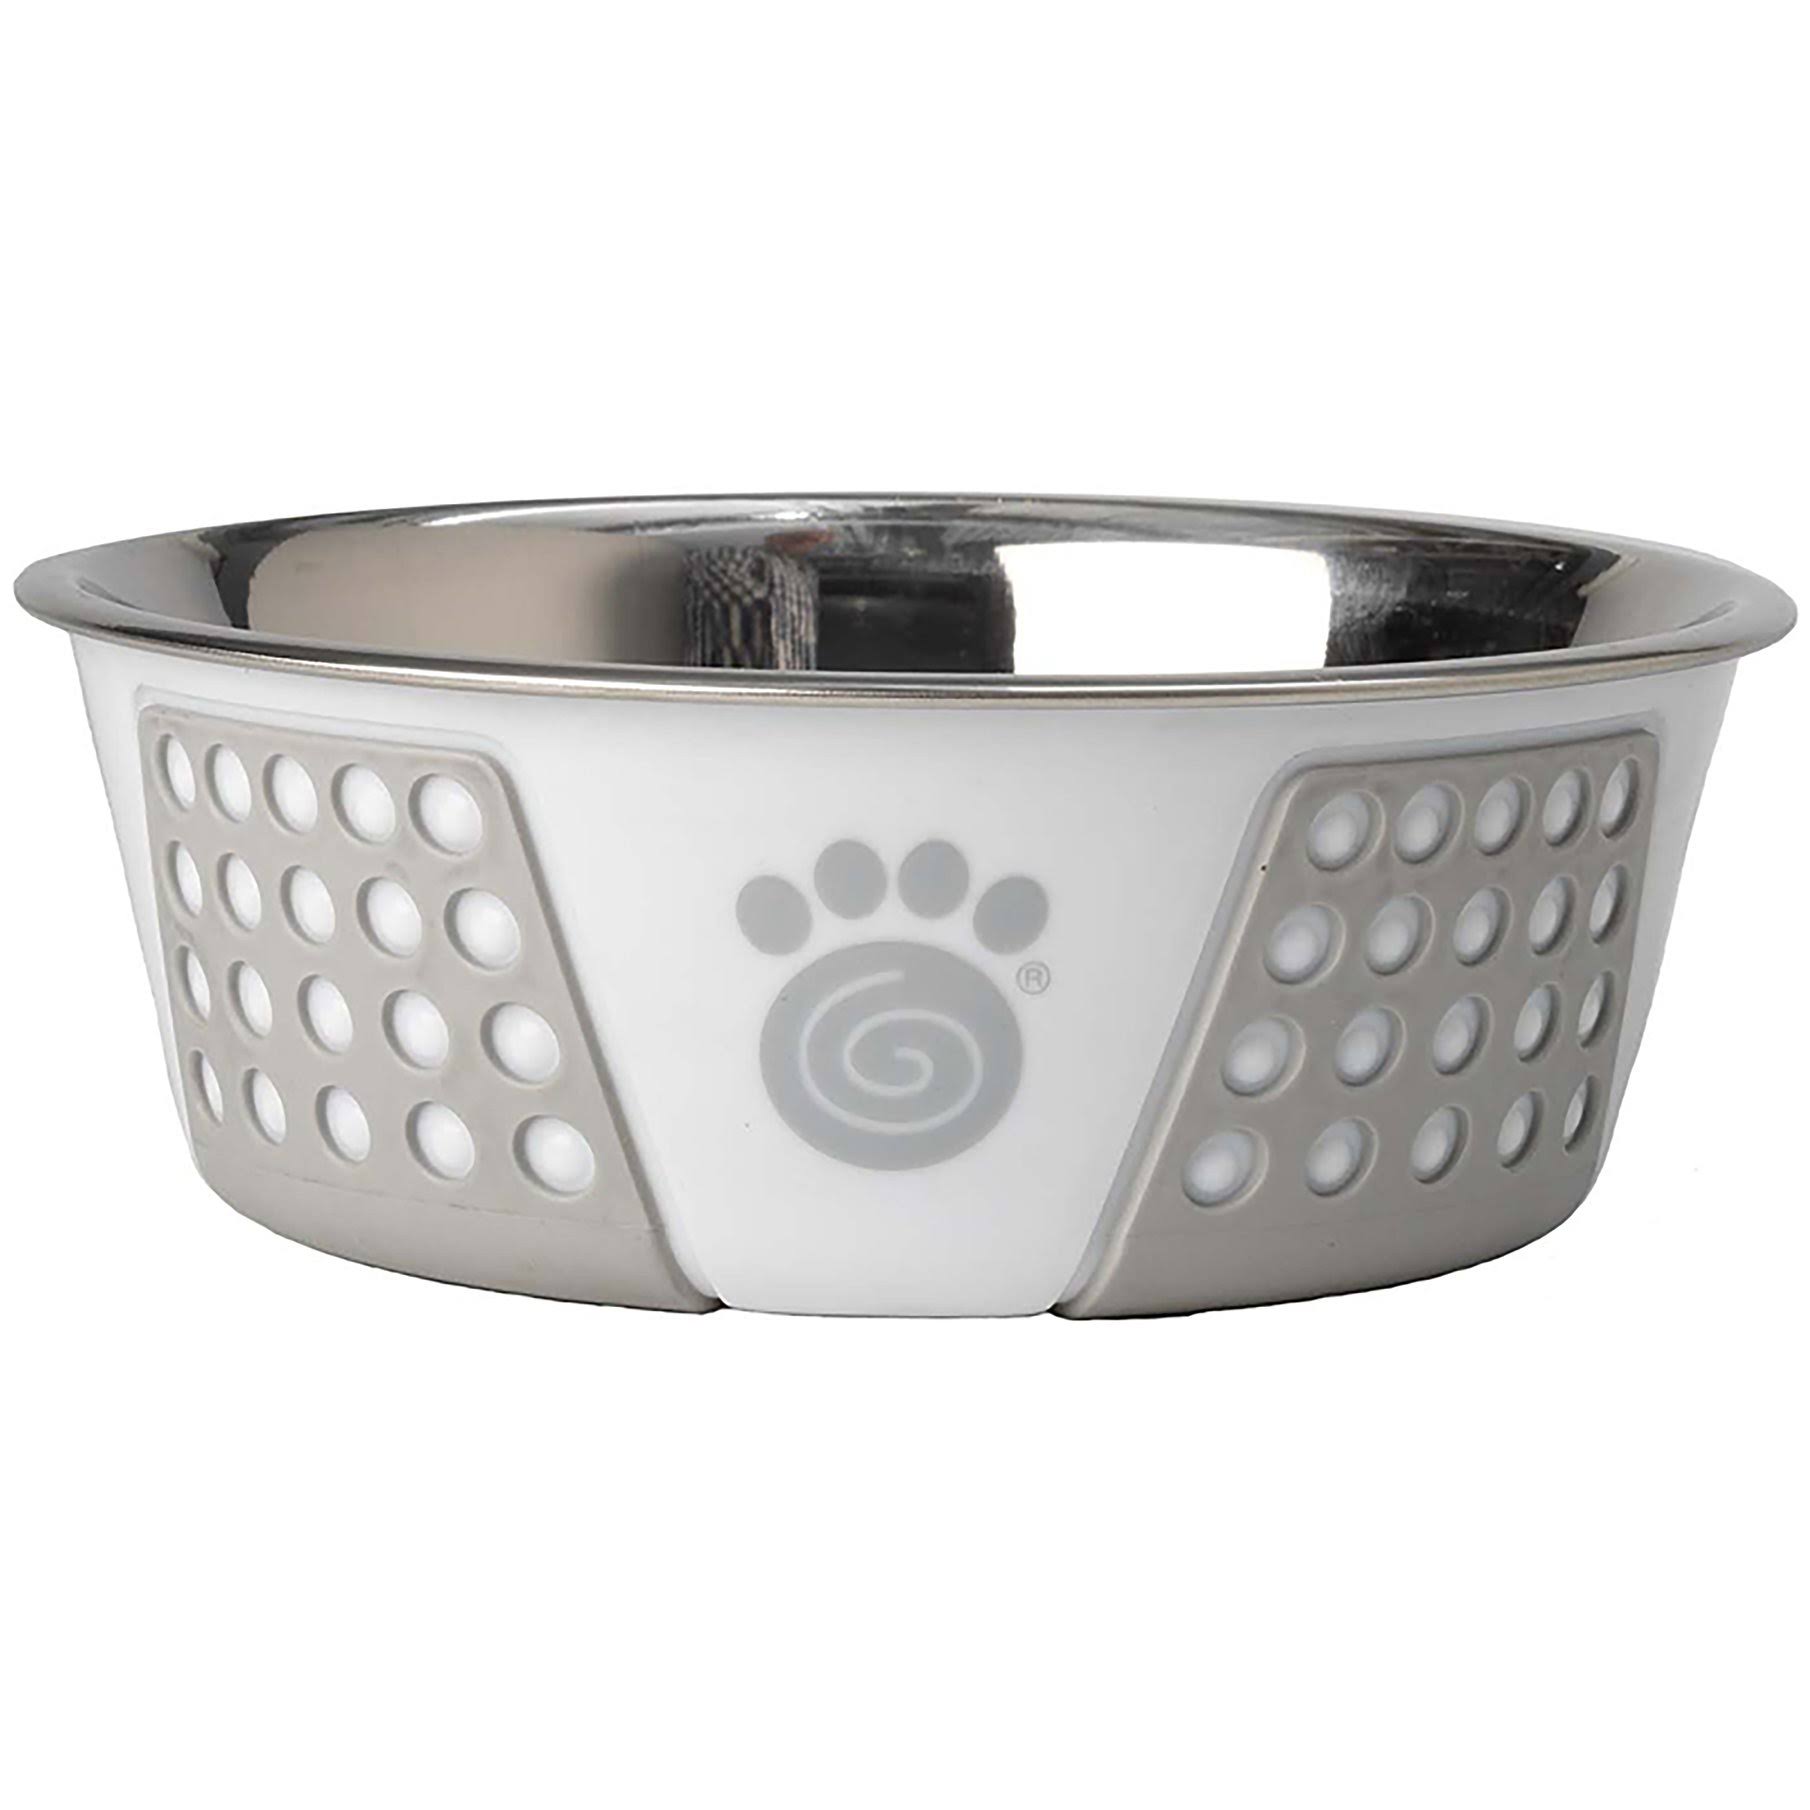 Petrageous Designs Stainless Steel Bowl - White and Gray